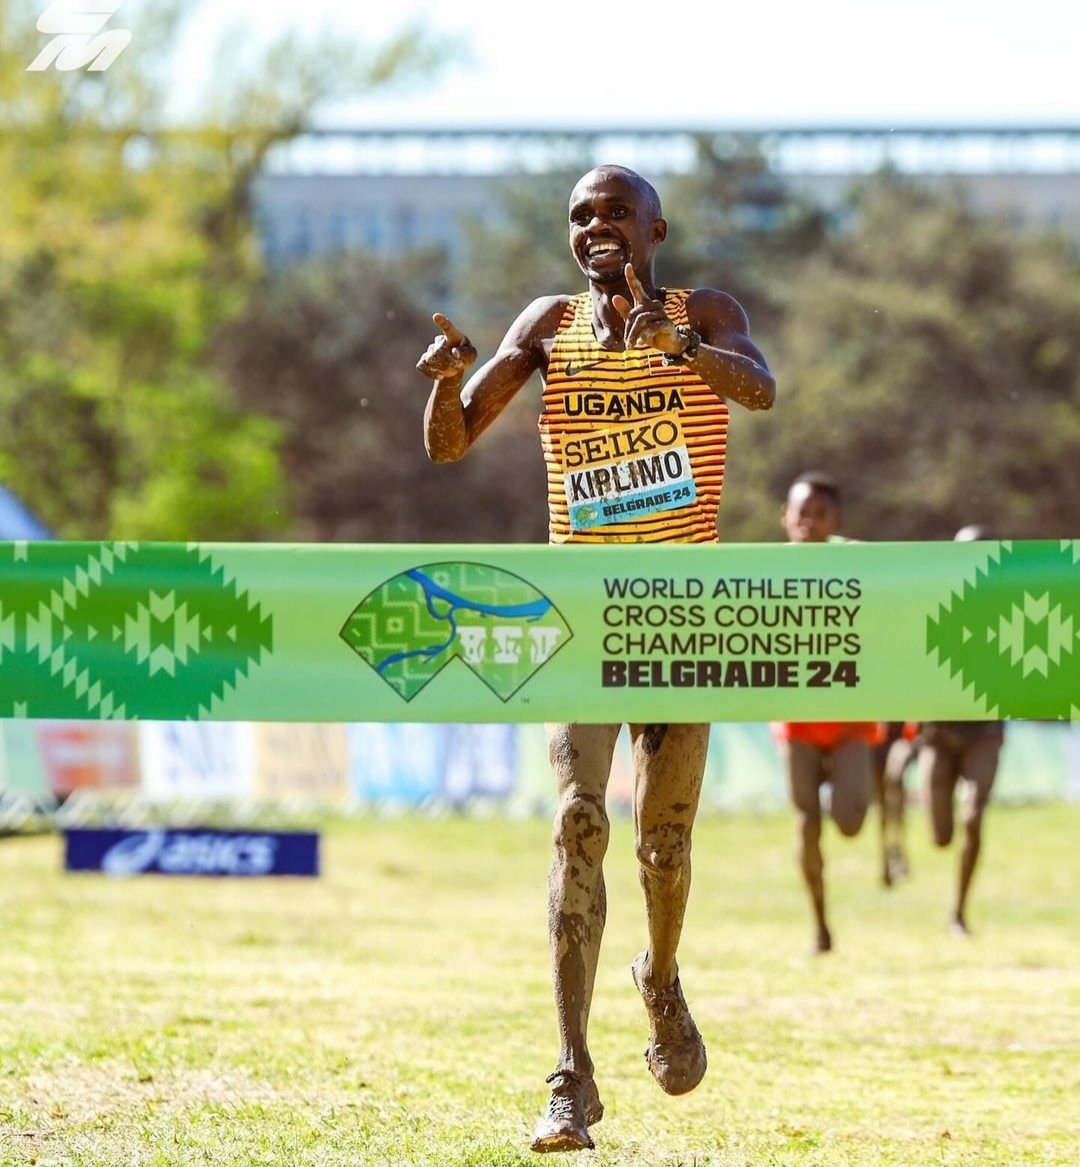 #SportsUg | 𝐖𝐨𝐫𝐥𝐝 𝐂𝐡𝐚𝐦𝐩𝐢𝐨𝐧 🏅 At a timing of 28:09 in Belgrade, Jacob Kiplimo has retained his World Cross Country title! Congratulations Team Uganda! Jacob Kiplimo - 🏅 Joshua Cheptegei - 🥈 #WorldCrossCountry2024